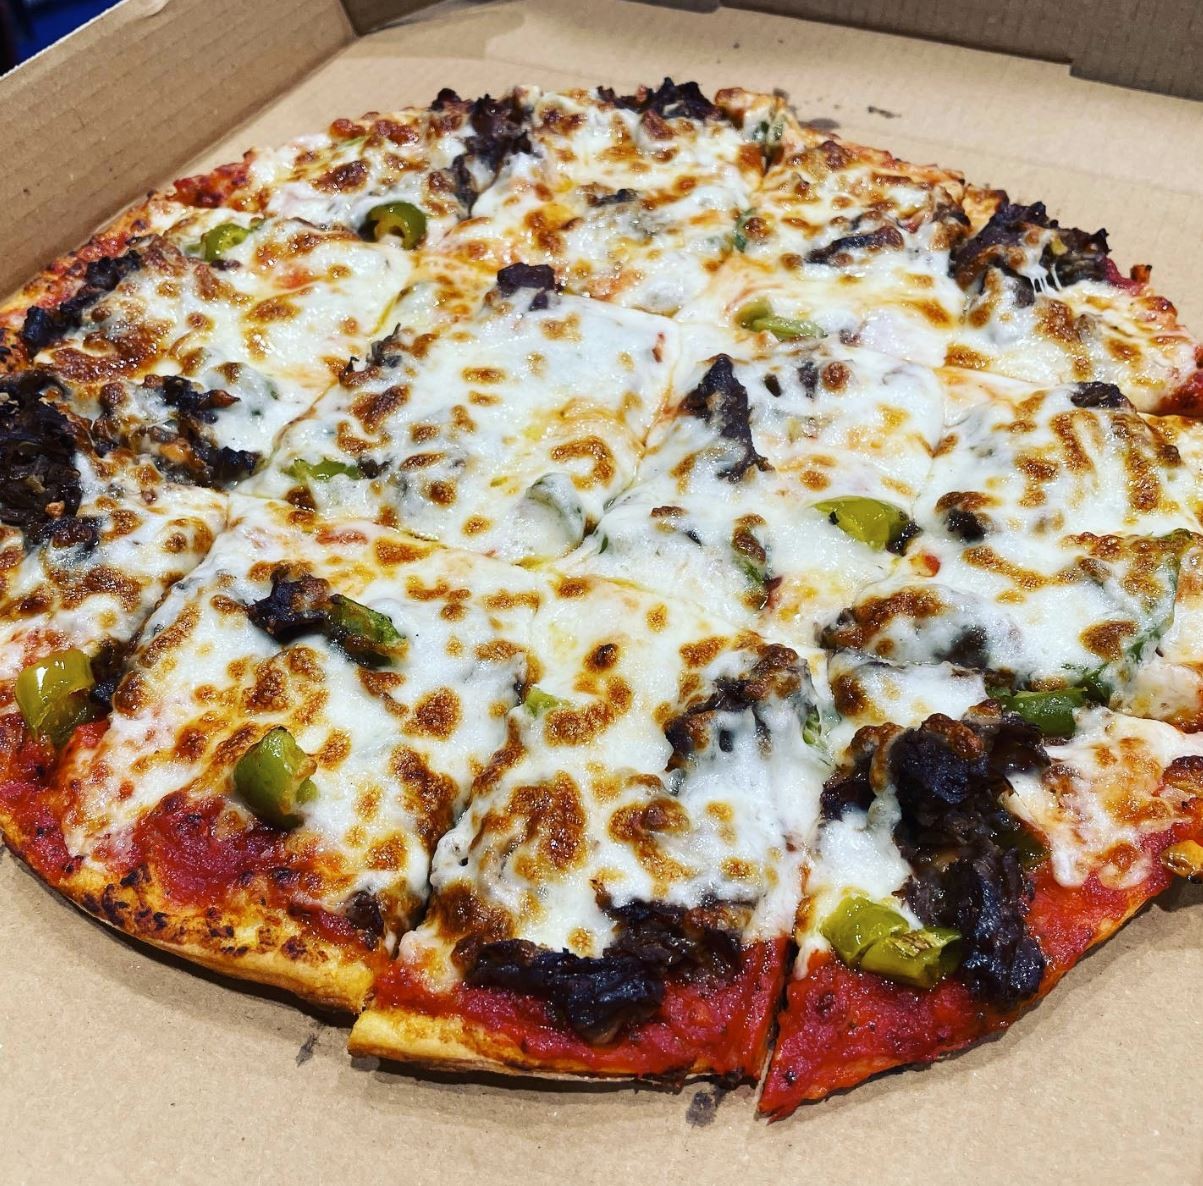 Connie's Classic Thin-Crust Super Pizza Review - This College Life